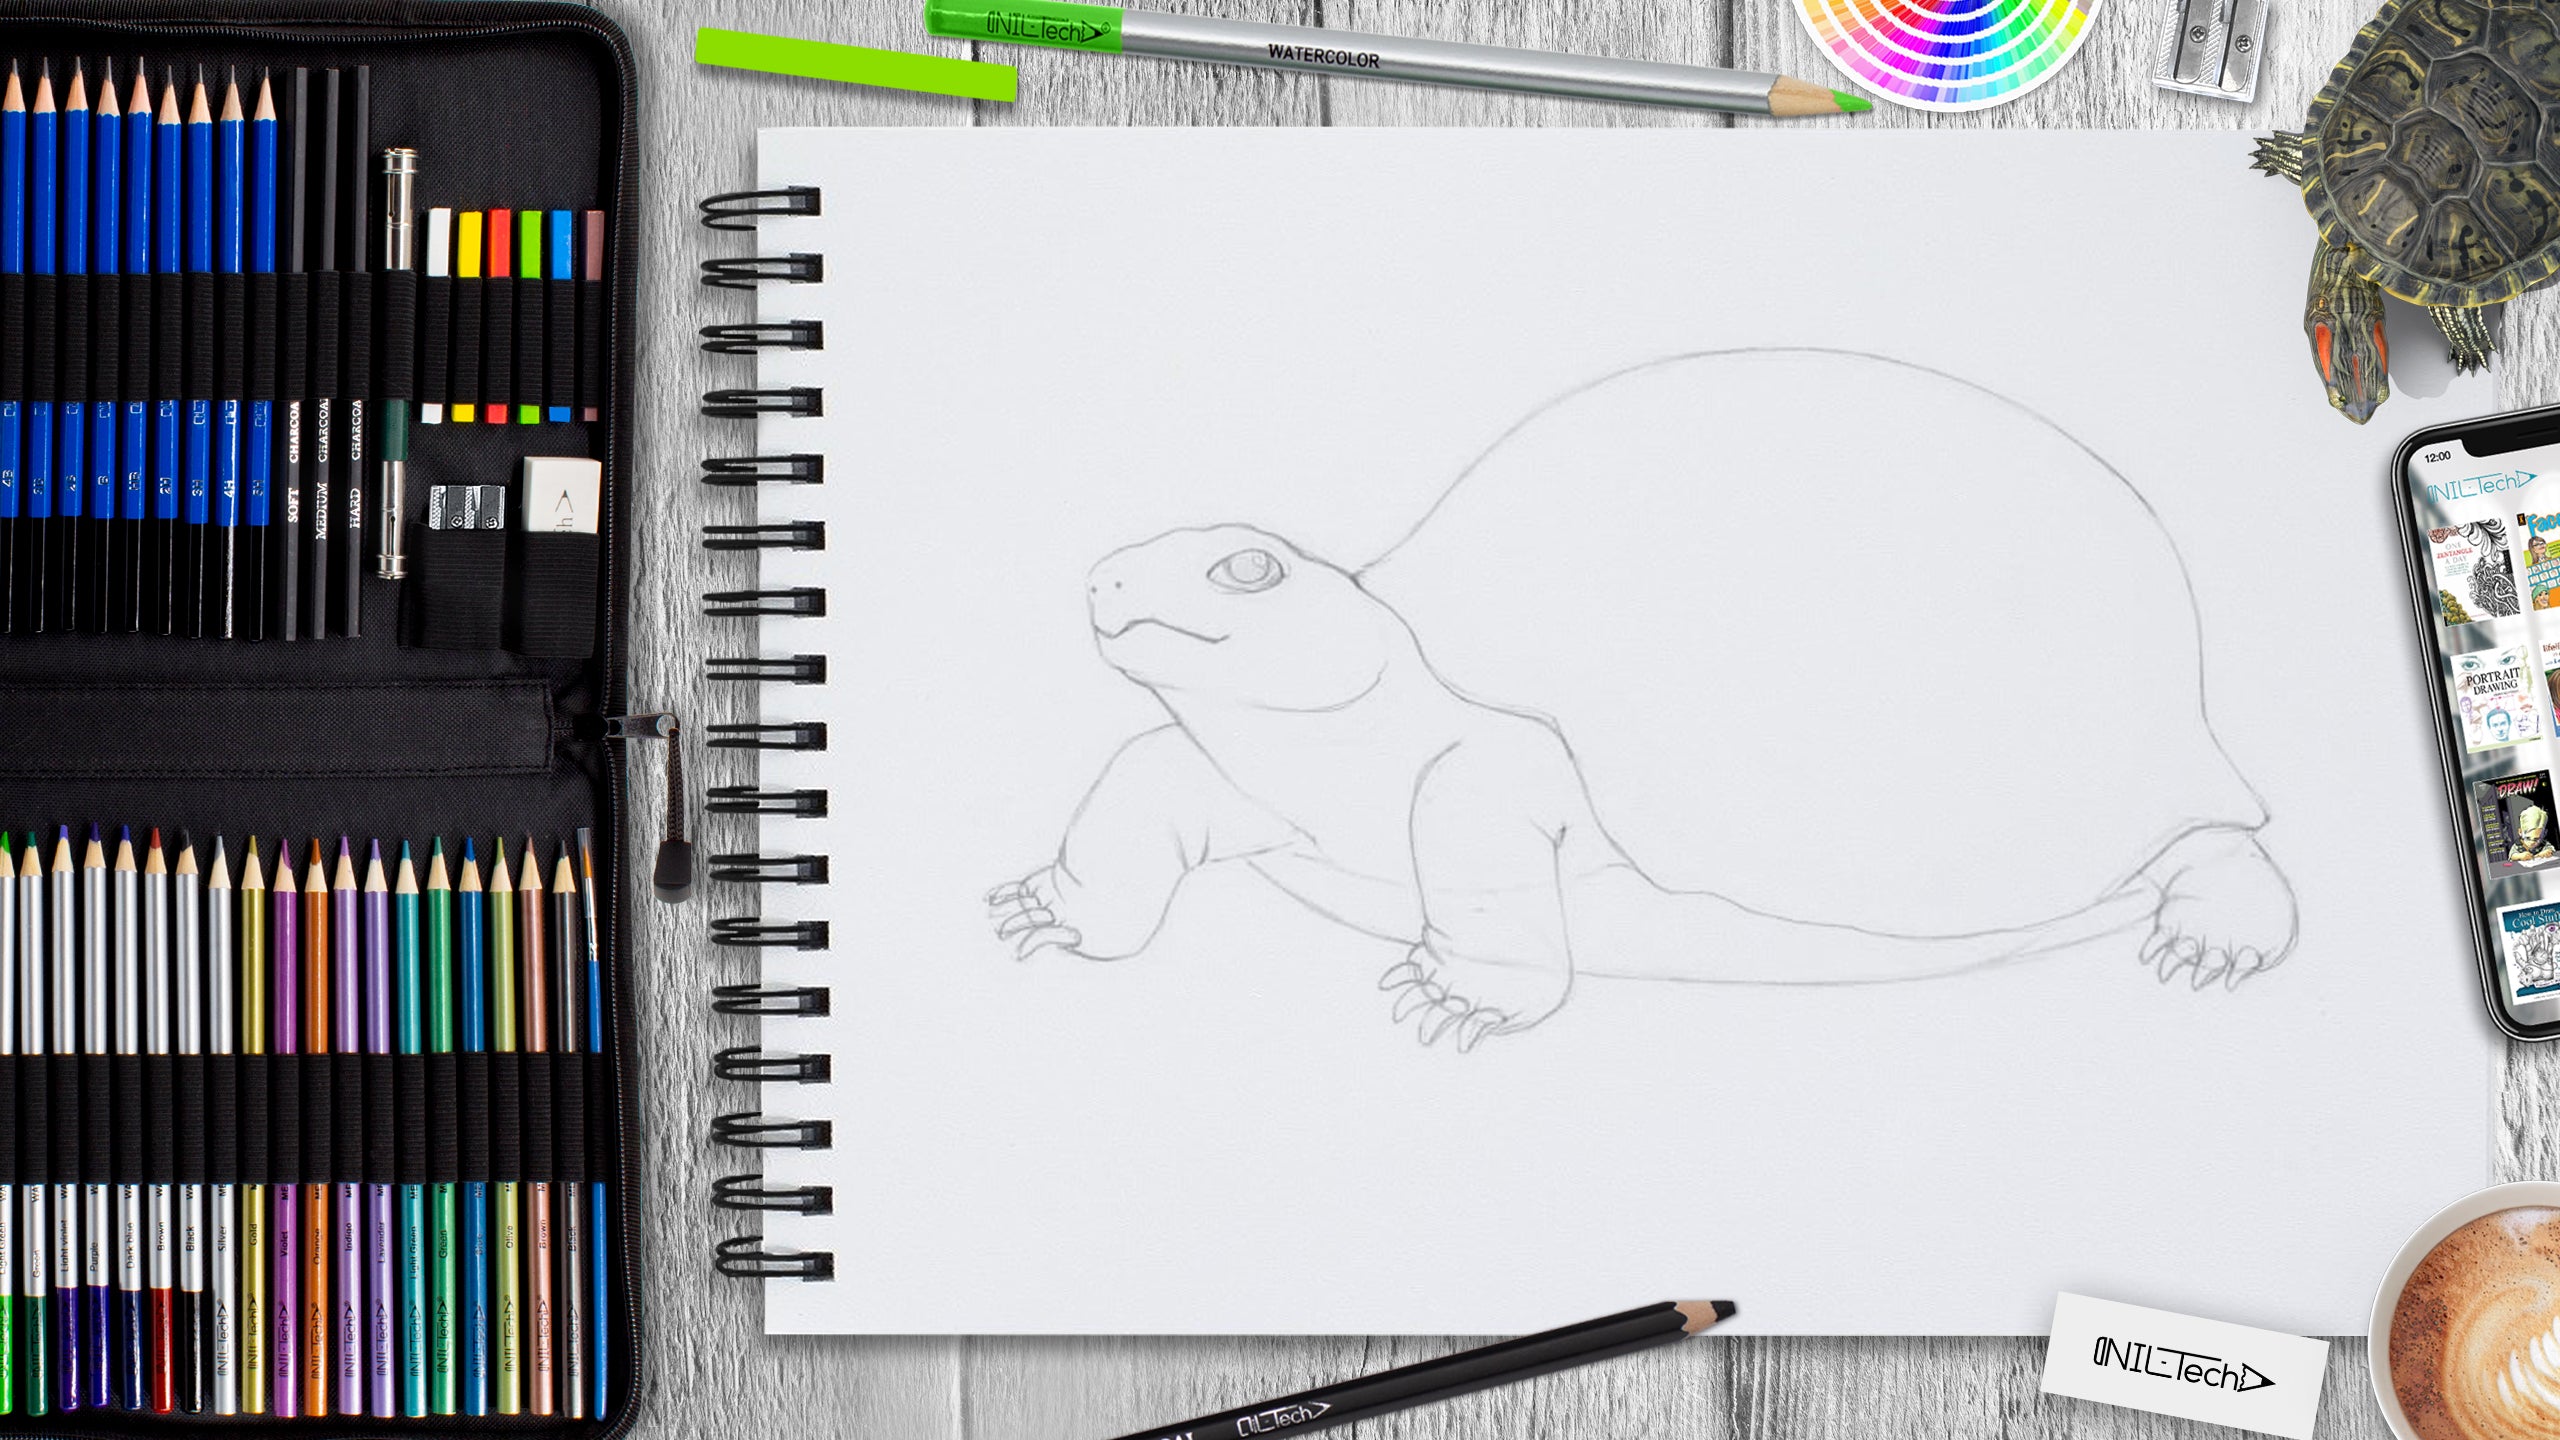 Lizard outline drawing 02 / how to draw A Lizard drawing for kids /  #artjanag - YouTube